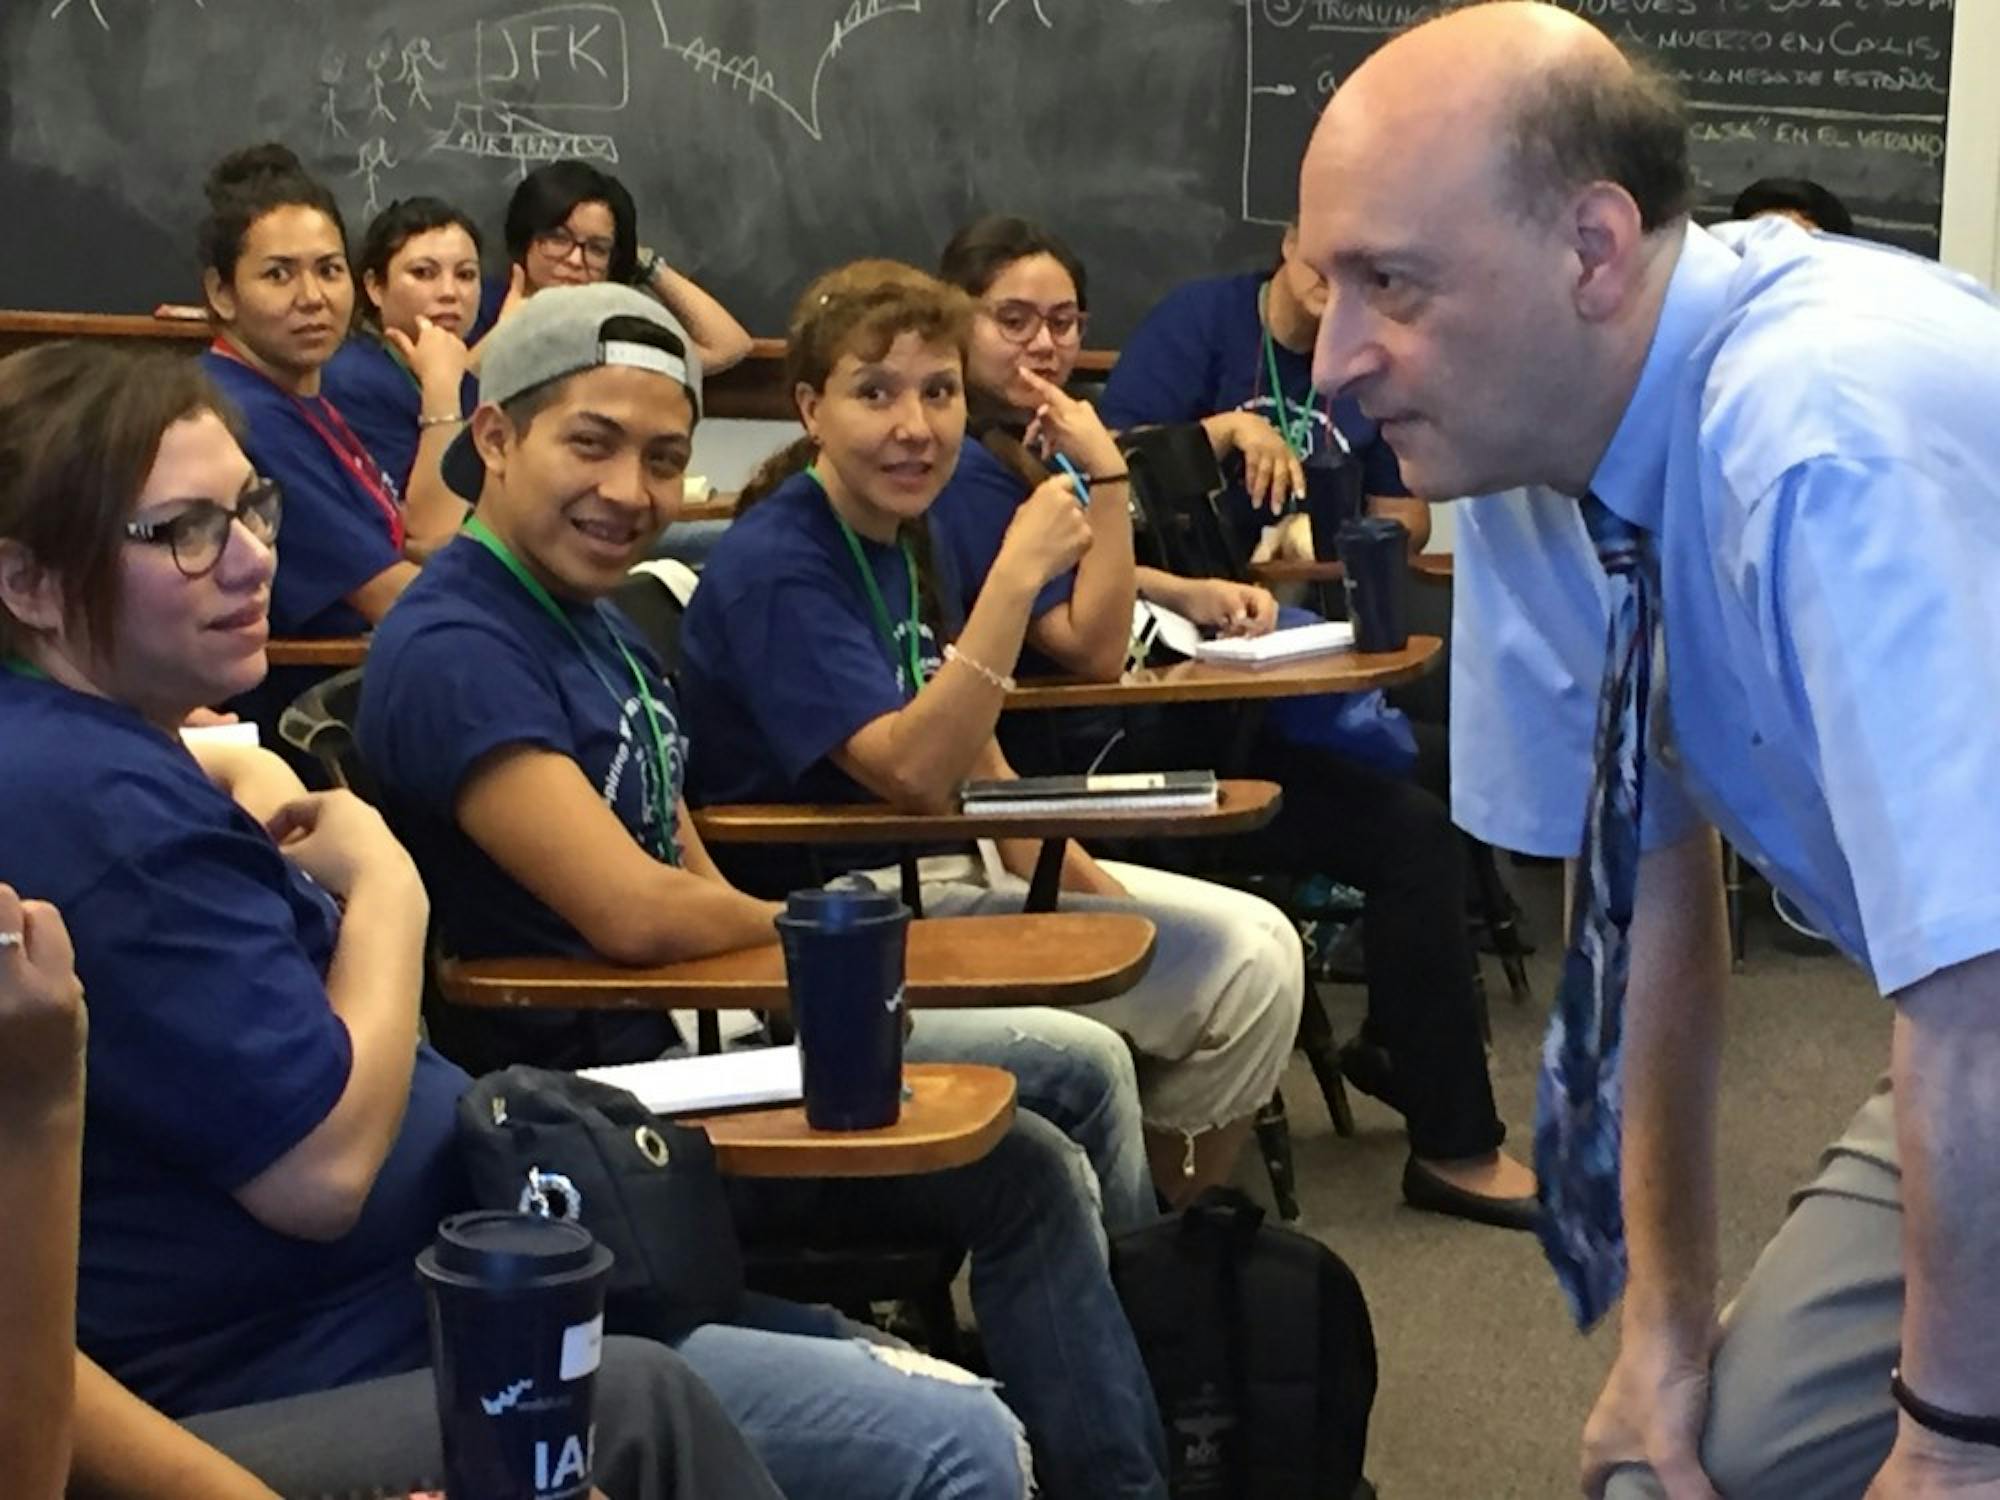 Joe Goldfield '76 gives a demonstration immersion class in French to showcase the Rassias method.